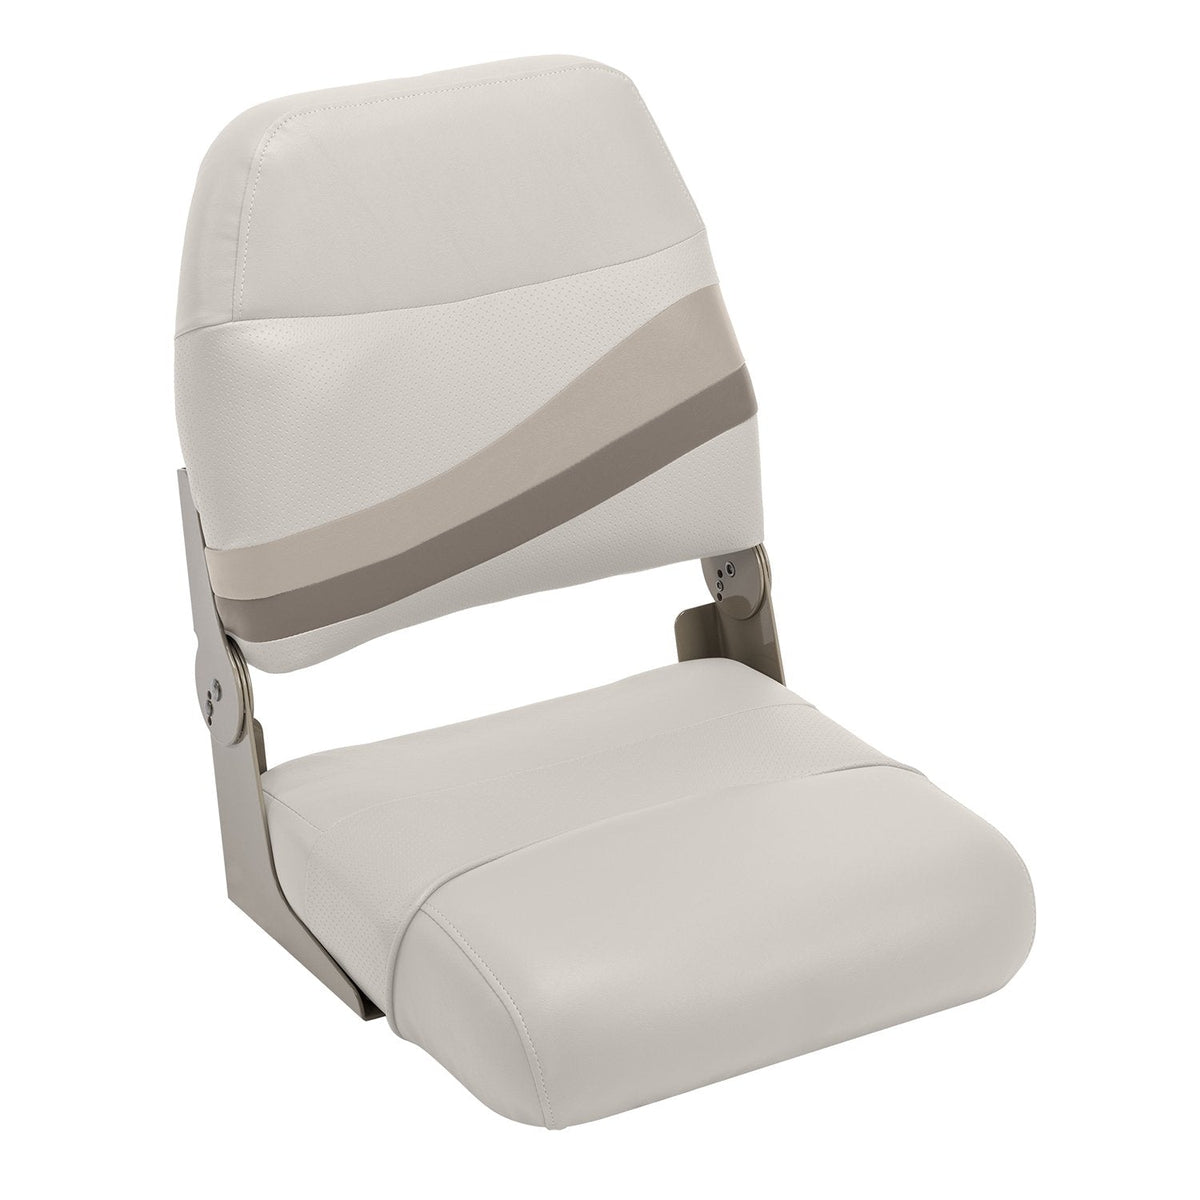 Wise Not Qualified for Free Shipping Wise Premier Pontoon High-Back Fishing Seat #BM1147-1066